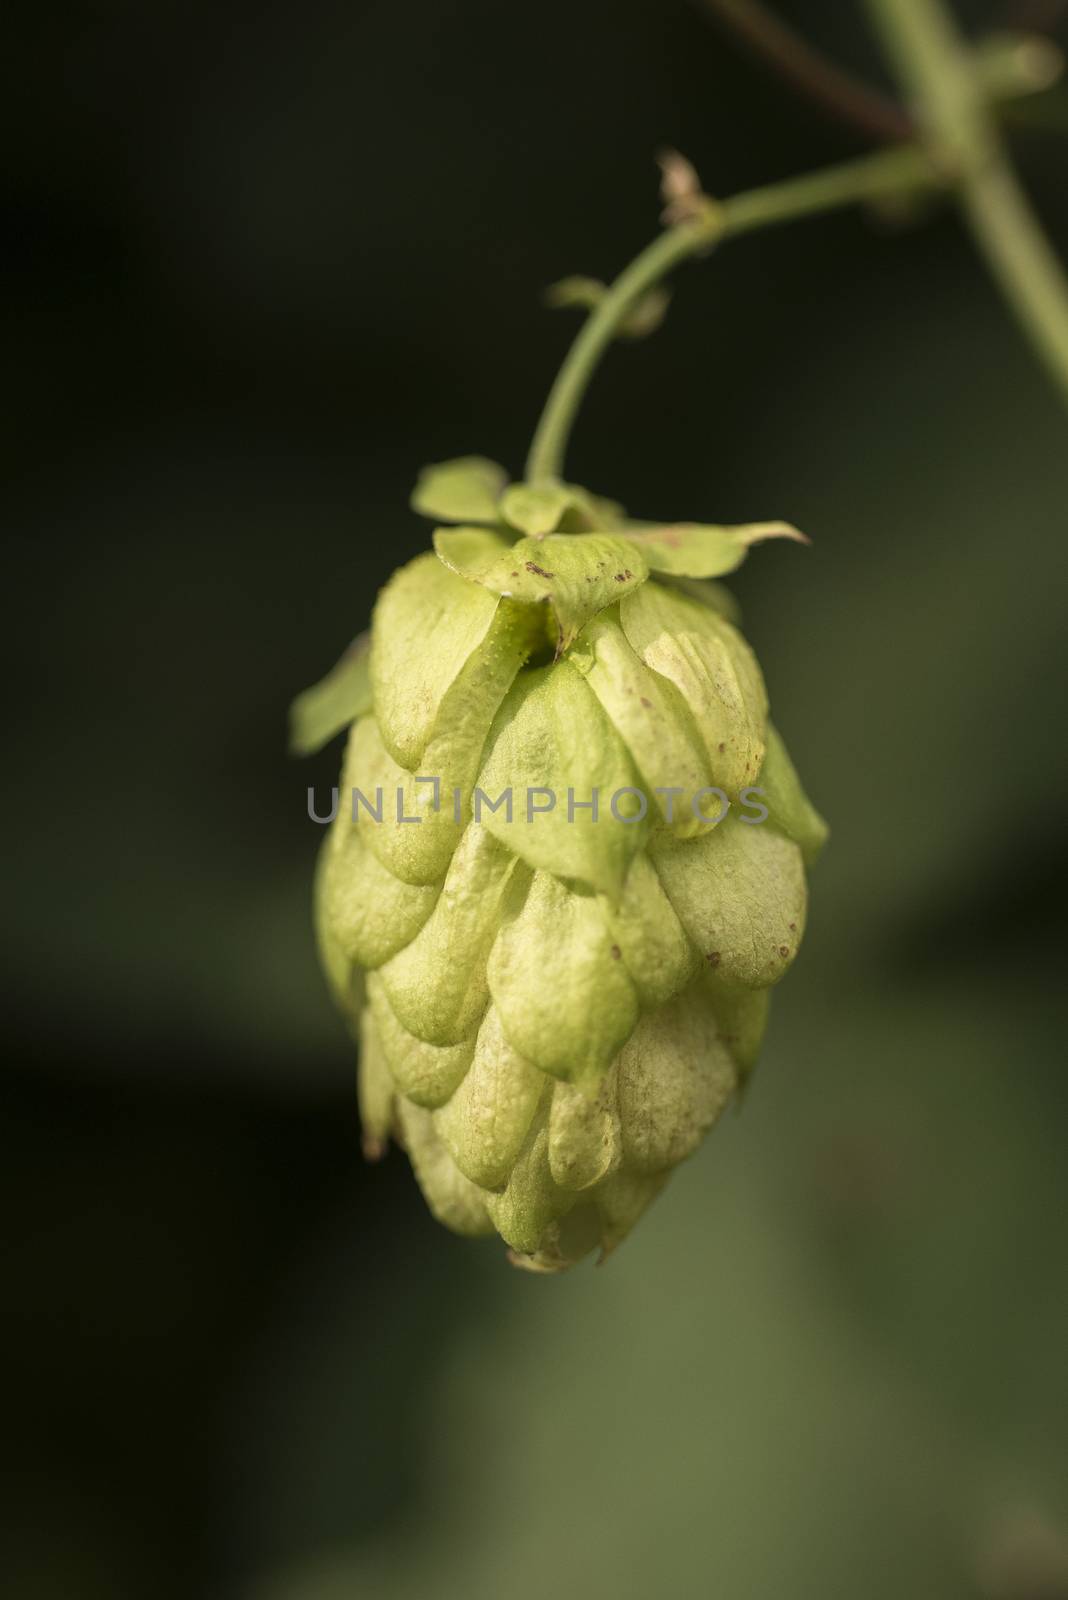 Cones of common hop (Humulus lupulus). anxiety, insomnia and other sleep disorders, restlessness, beer